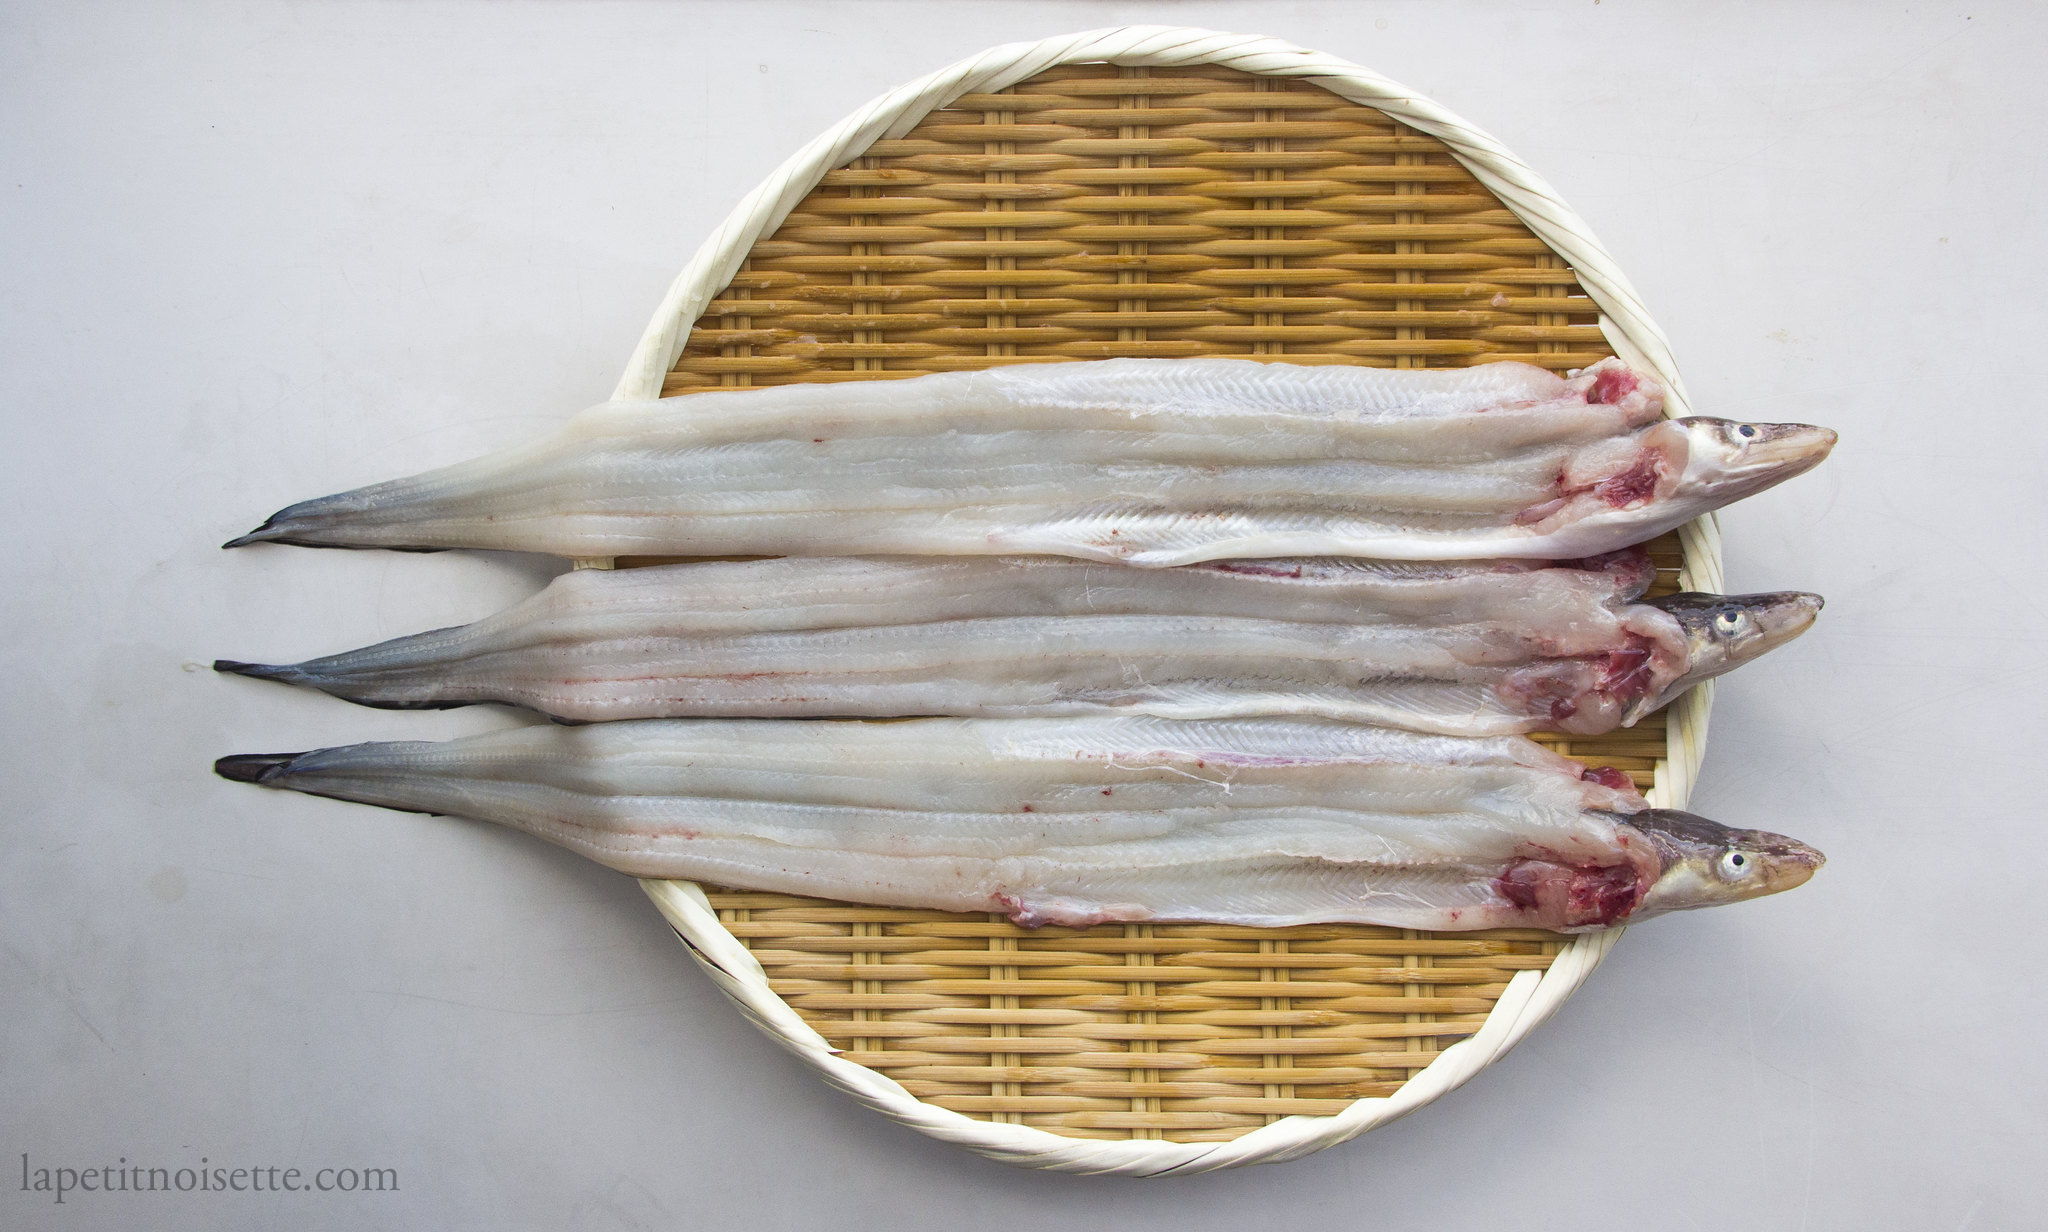 Filleted Japanese sea eel on a bamboo colander.